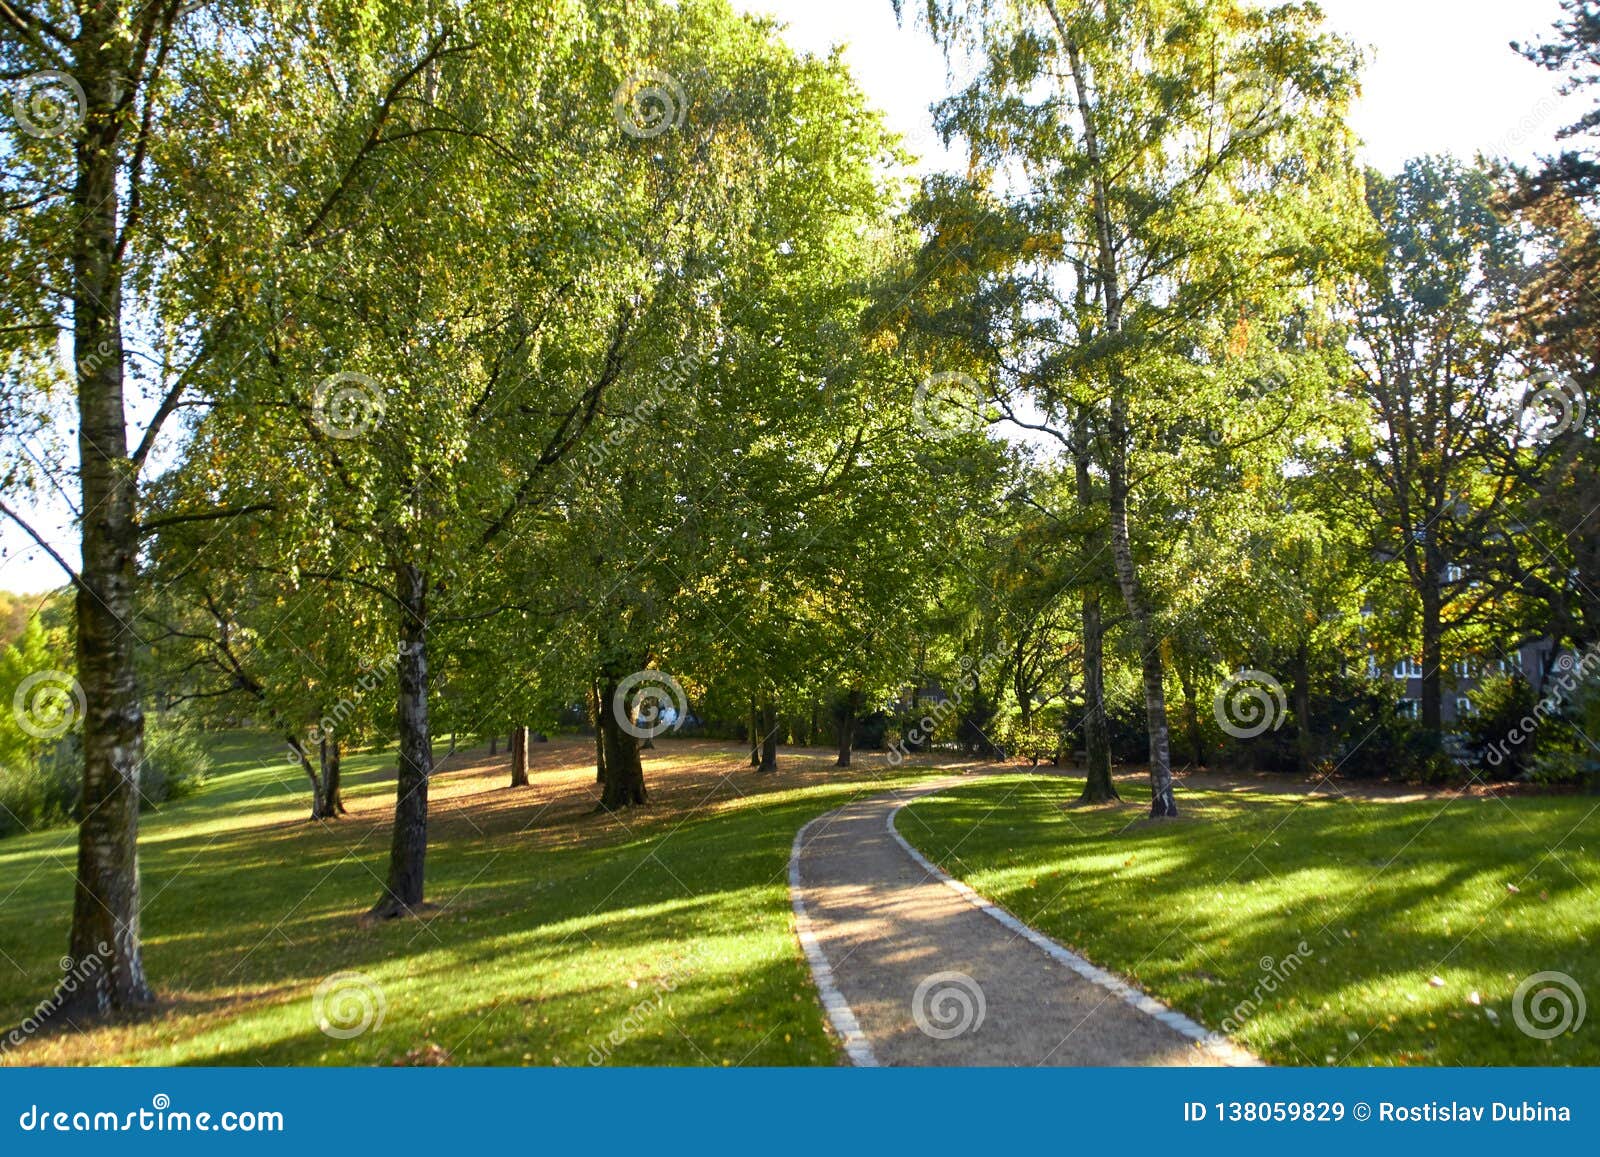 Photo of a Park in a German City. Beautiful Nature of Green Park Area of Hamburg. Park Paths for Walking People. Beautifu Stock Image Image forest, 138059829